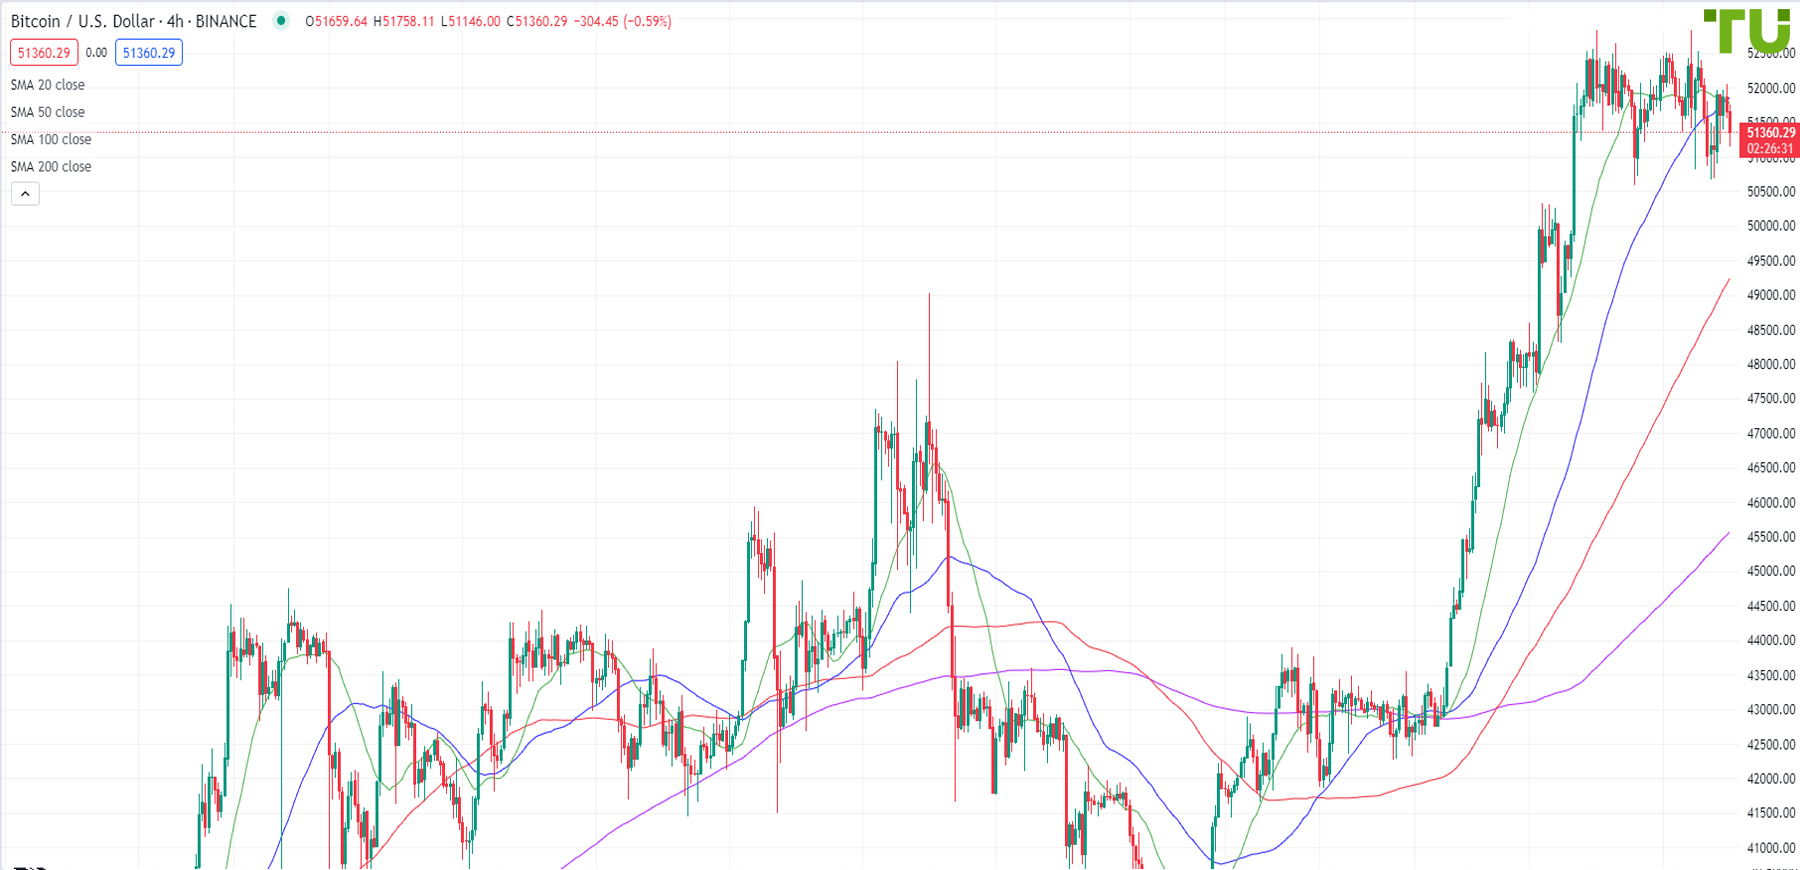 BTC/USD unable to break through resistance; correction risks are growing